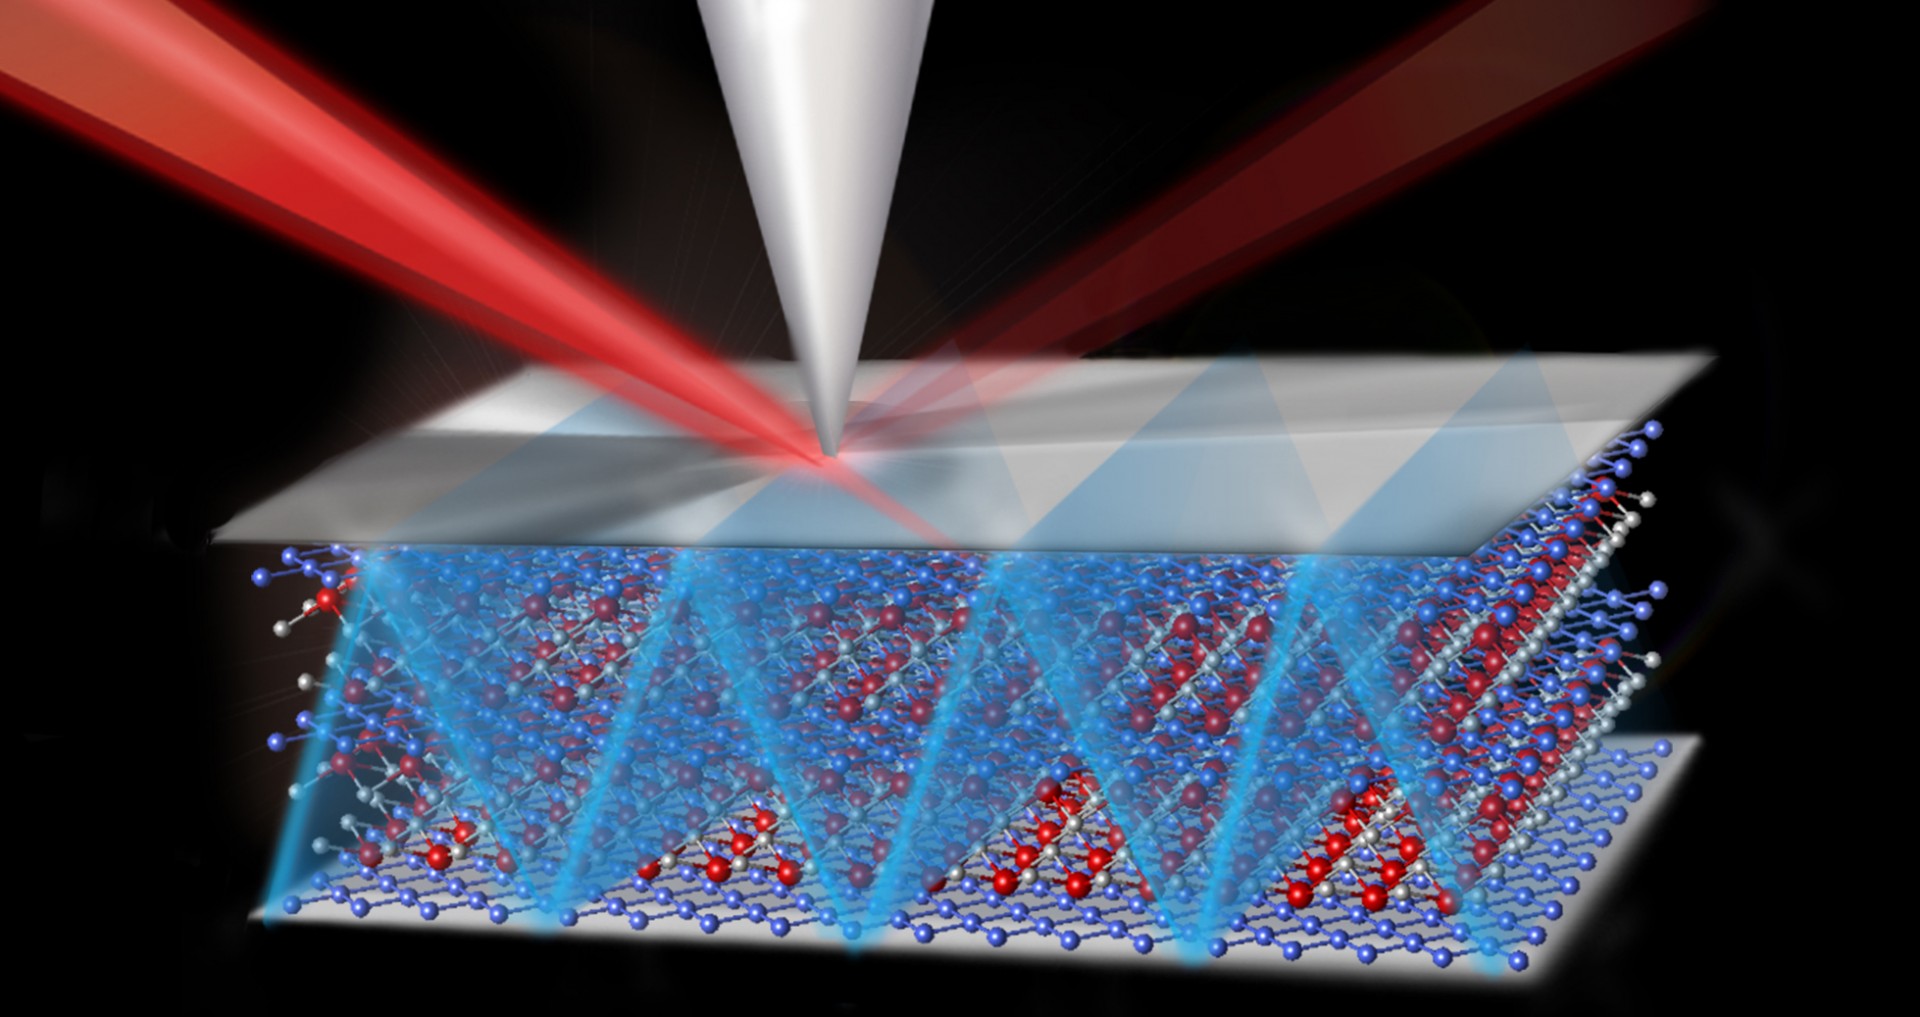 Infrared laser light (red beam) illuminates the surface of ZrSiSe and mixes with electron oscillations enabled by an atomic force microscope (silver cone), propagating light as ray-like structures that guide the light through the interior (blue zig-zag).